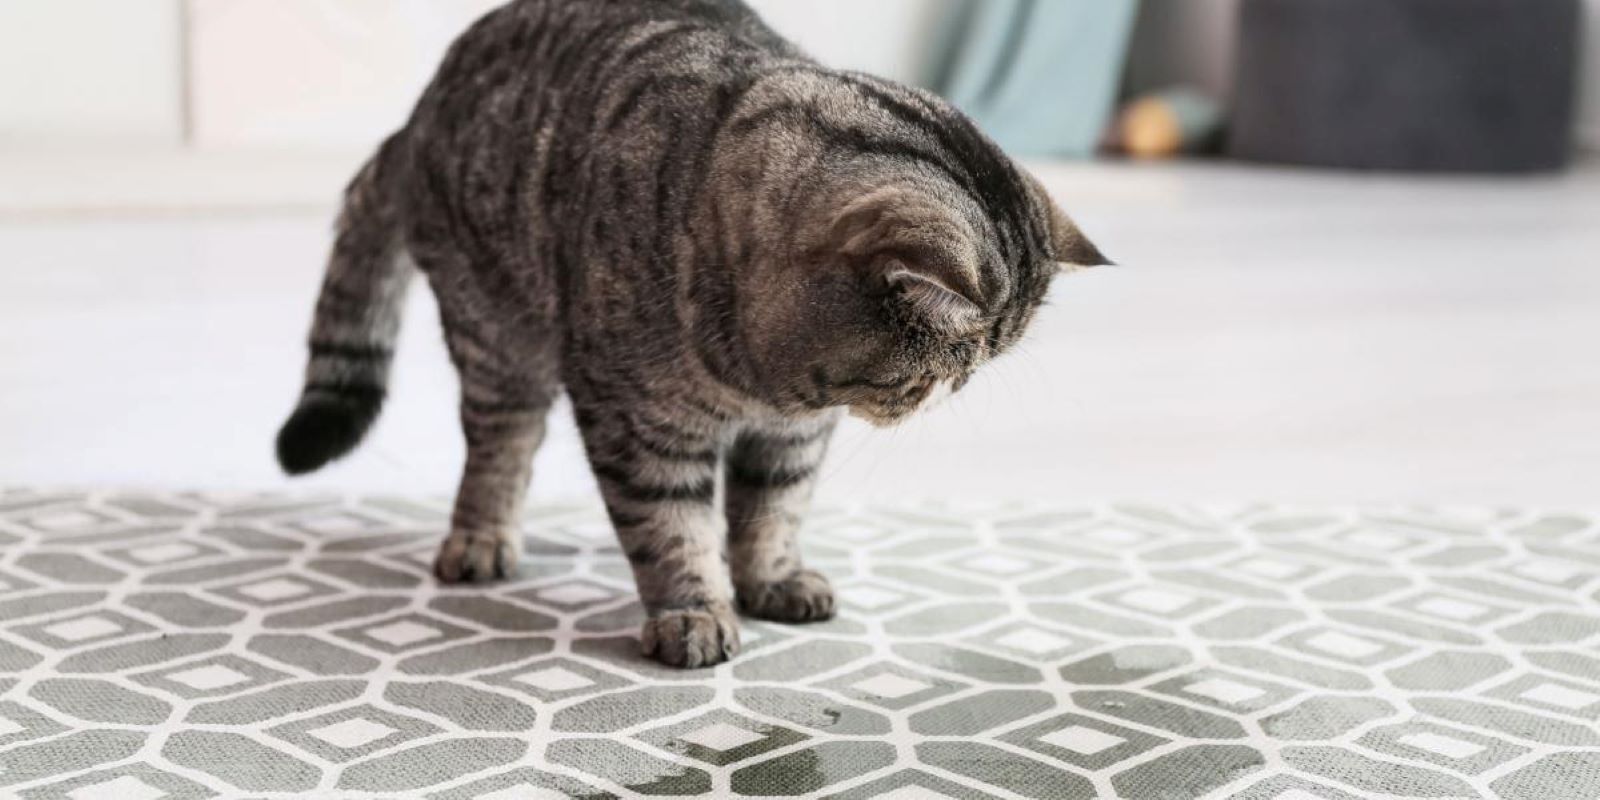 How Do I Stop My Cat From Peeing On My Rug